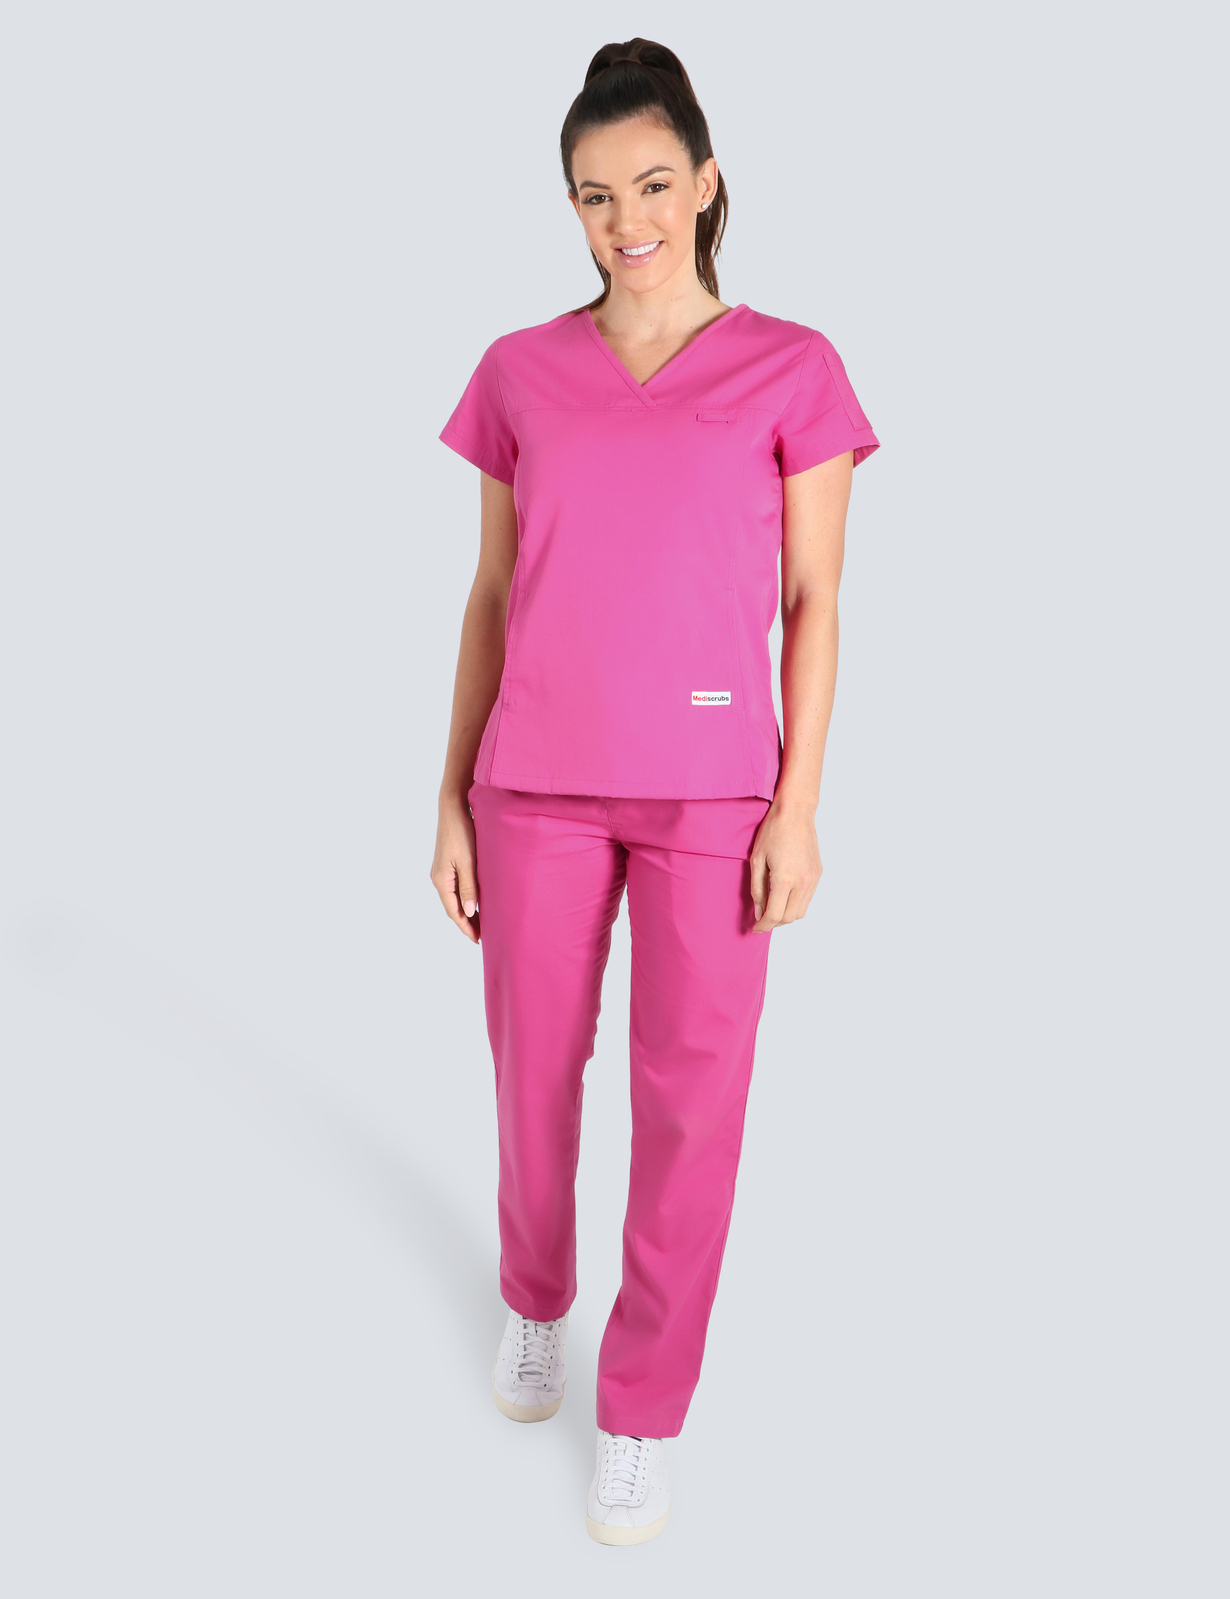 Children's Hospital Melbourne - ED (Women's Fit Solid Scrub Top and Cargo Pants in Pink incl Logos)